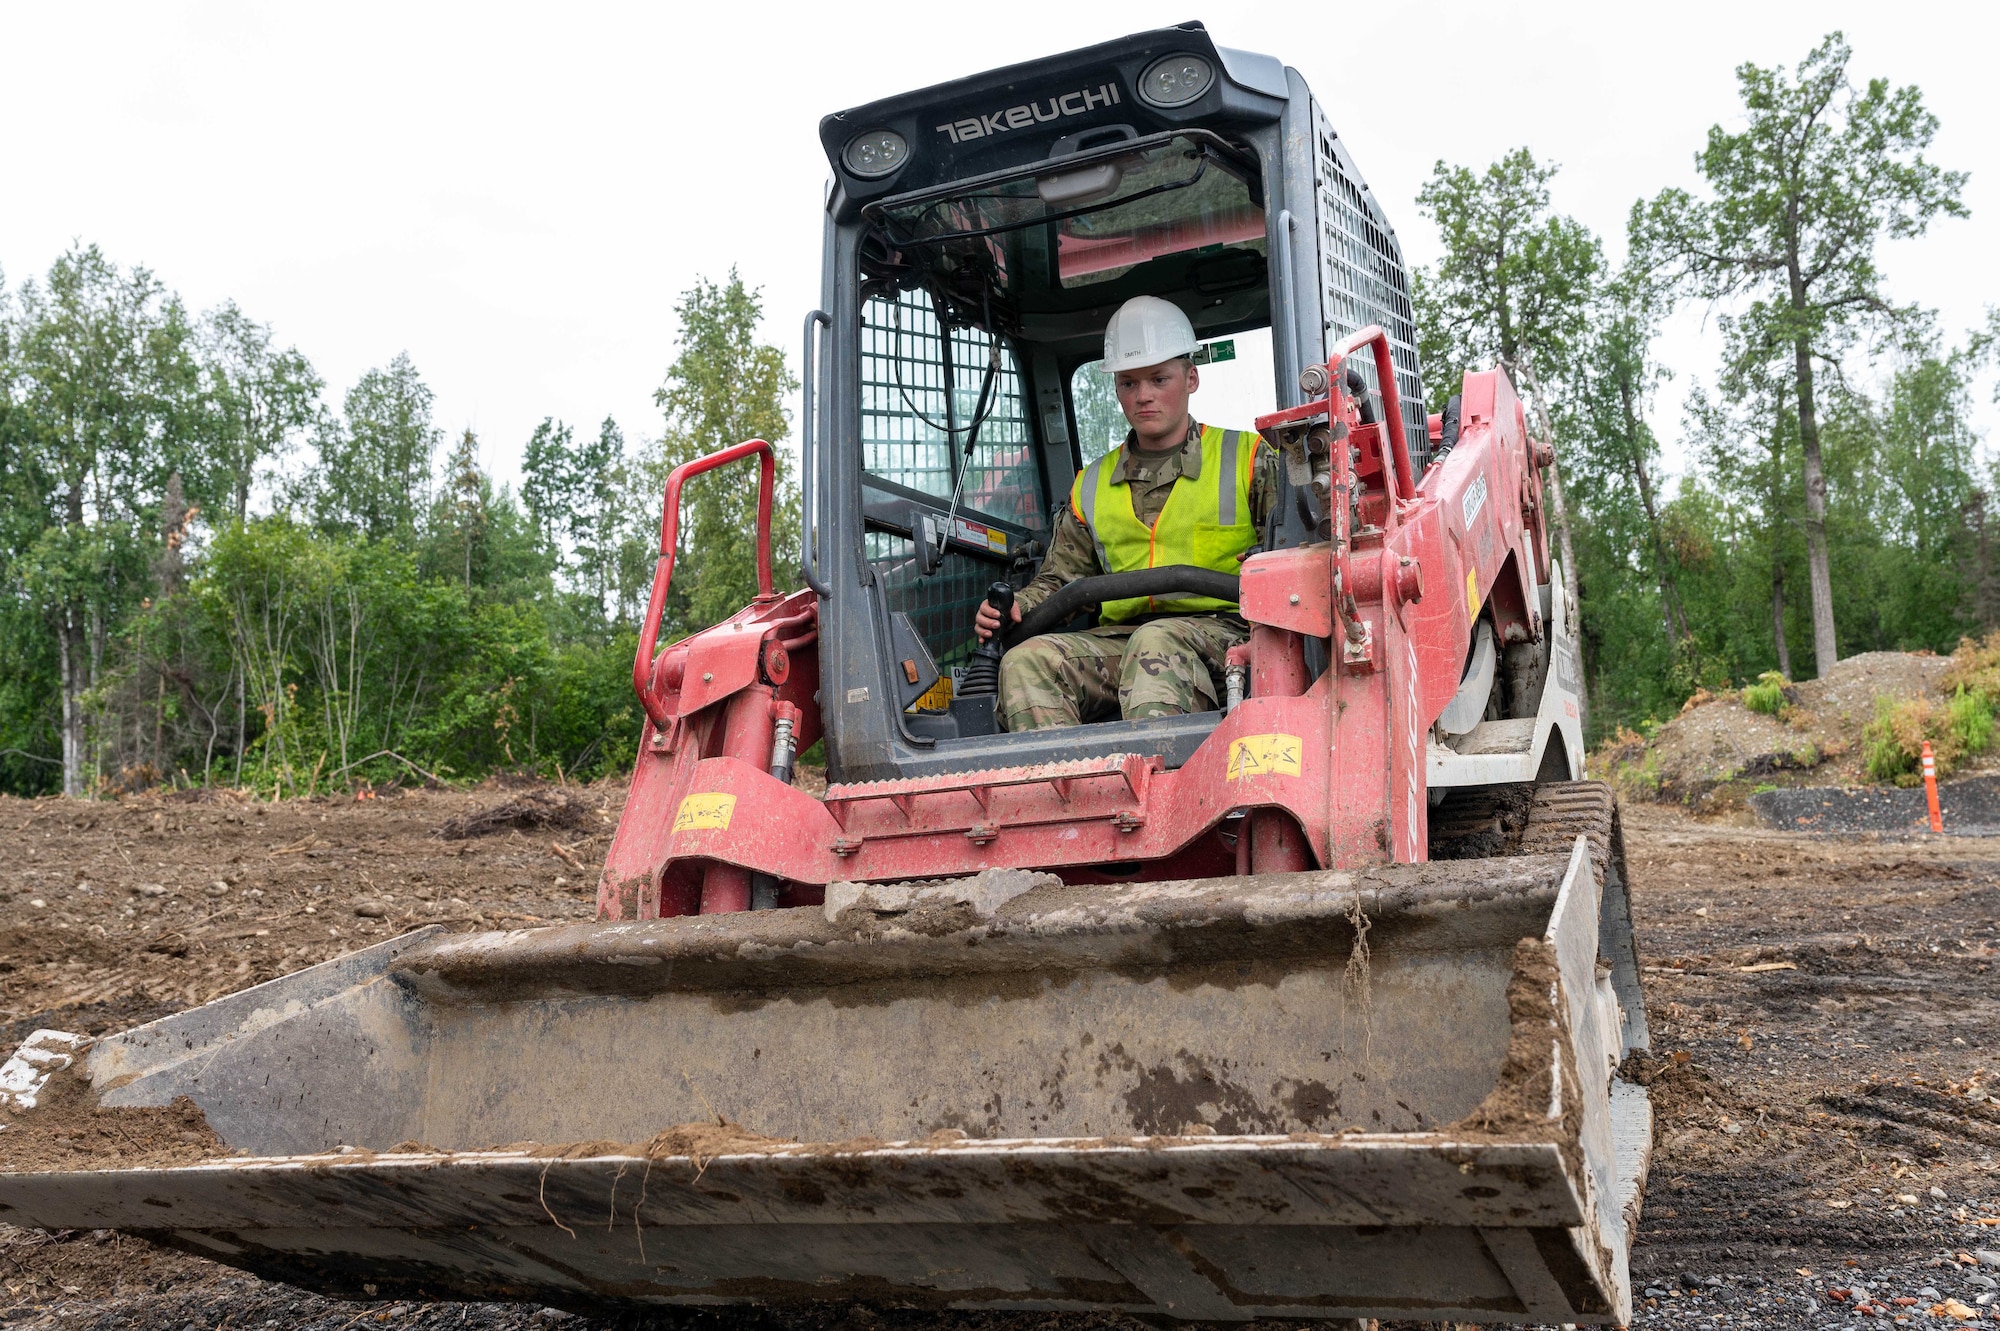 Senior Airman Nathan Smith, 934th Civil Engineer Squadron civil engineering apprentice, operates the skid loader to backfill holes with dirt or cement at Joint Base Elmendorf-Richardson, Alaska, Aug. 9, 2023. (U.S. Air Force photo by Senior Airman Colten Tessness)